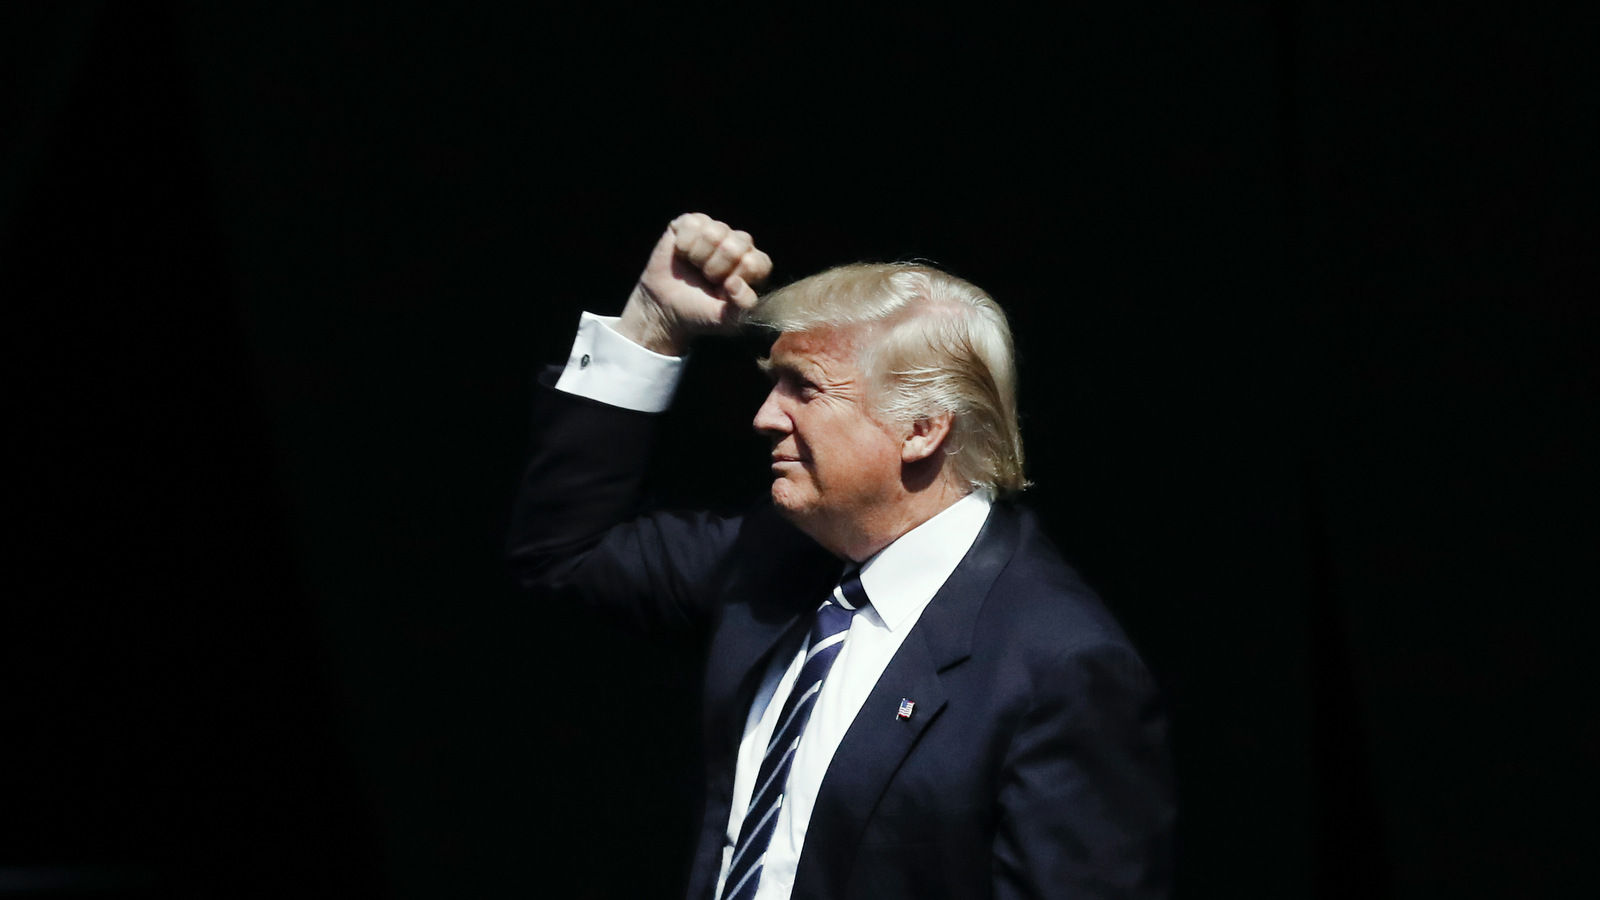 President-elect Donald Trump waves to supporters during a rally in Grand Rapids, Mich., Friday, Dec. 9, 2016. (AP Photo/Paul Sancya)